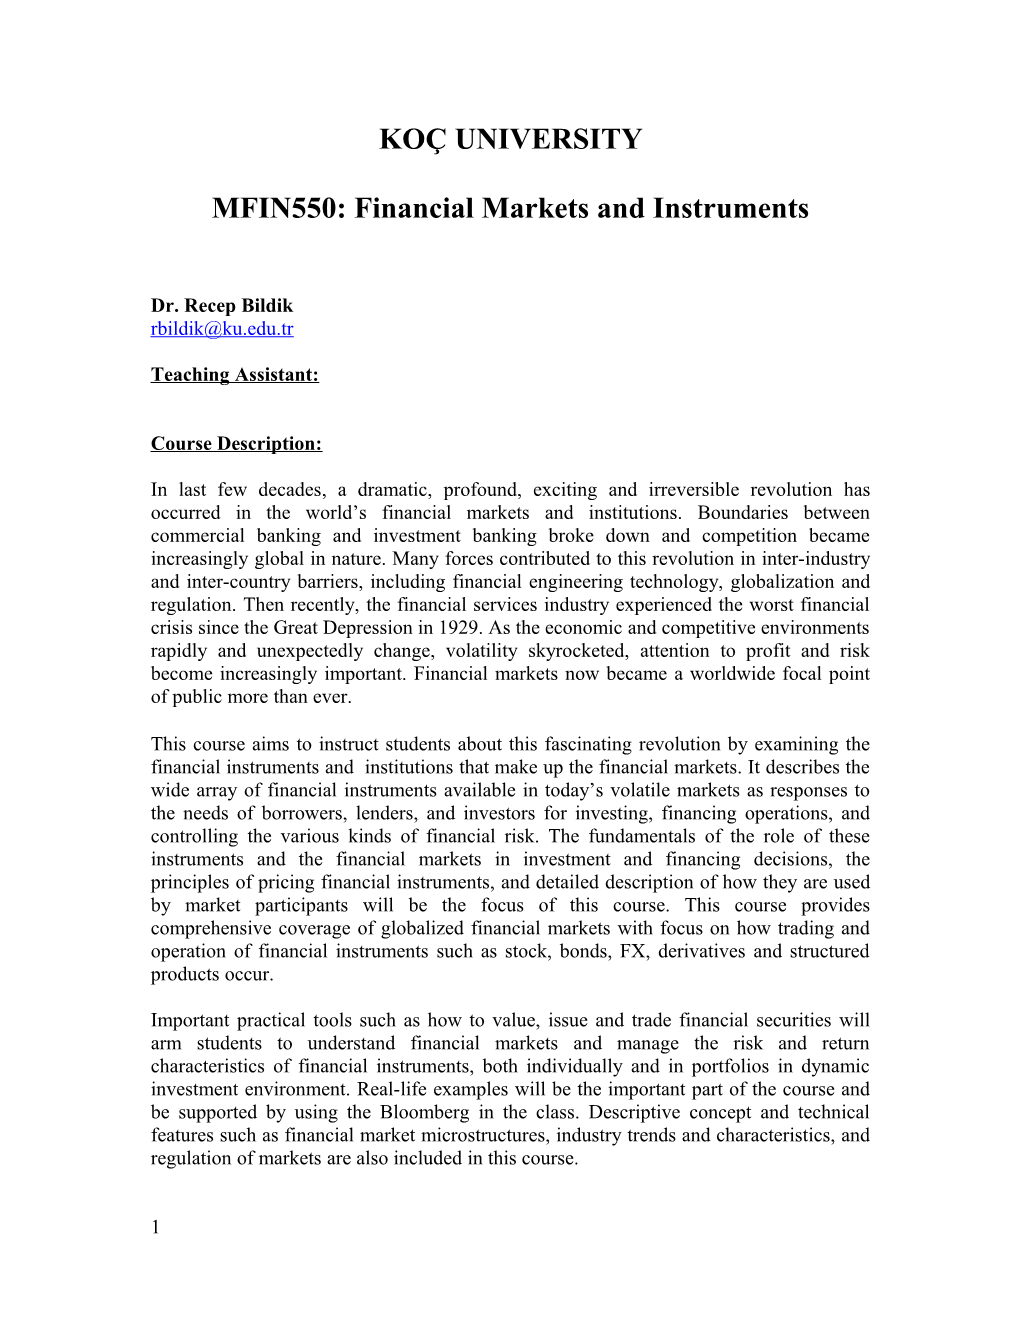 MFIN550: Financial Markets and Instruments